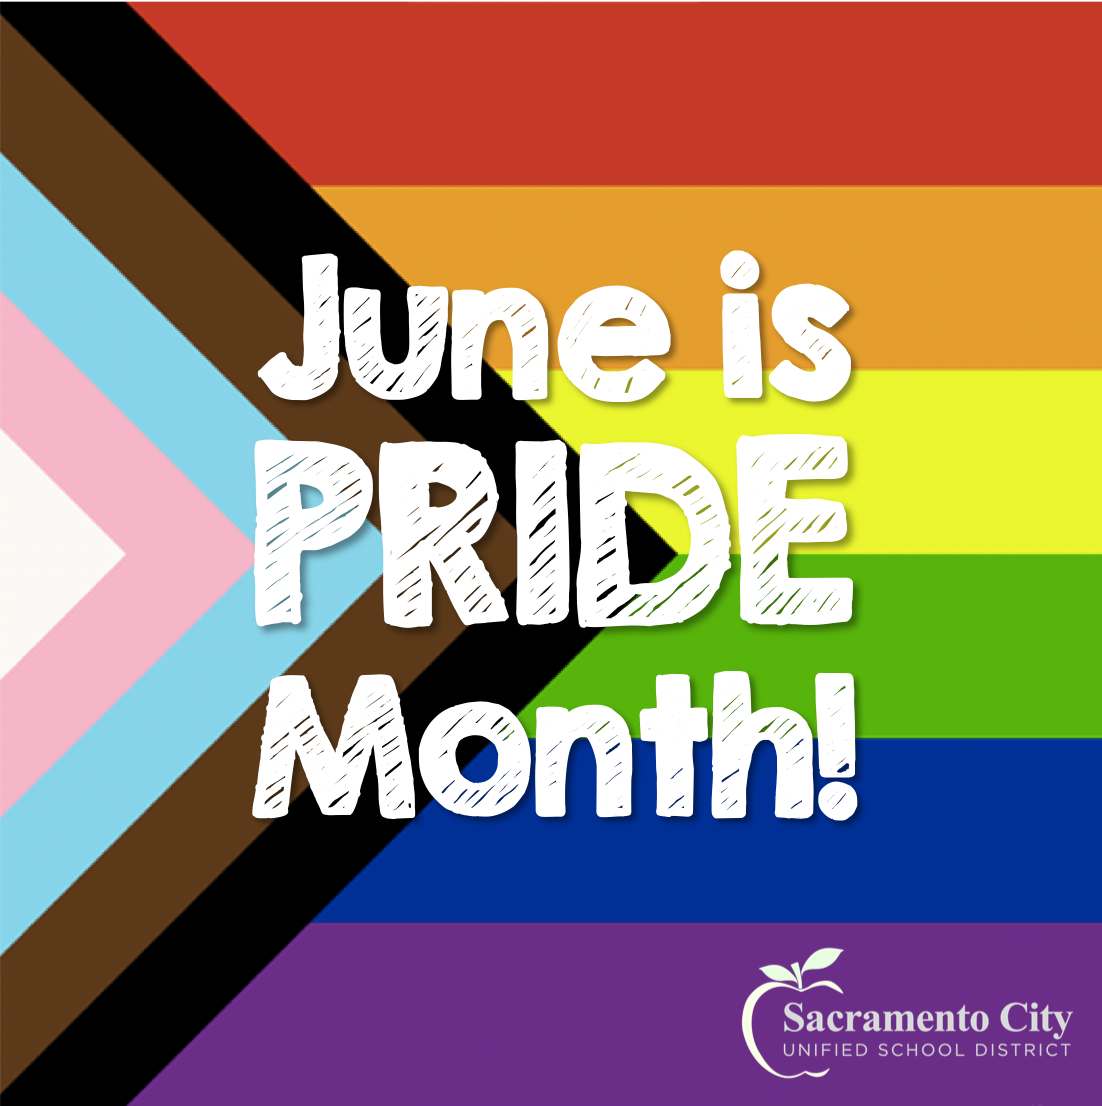 LGBTQ Rainbow Flag with the words "June is Pride Month!" and the SCUSD logo.